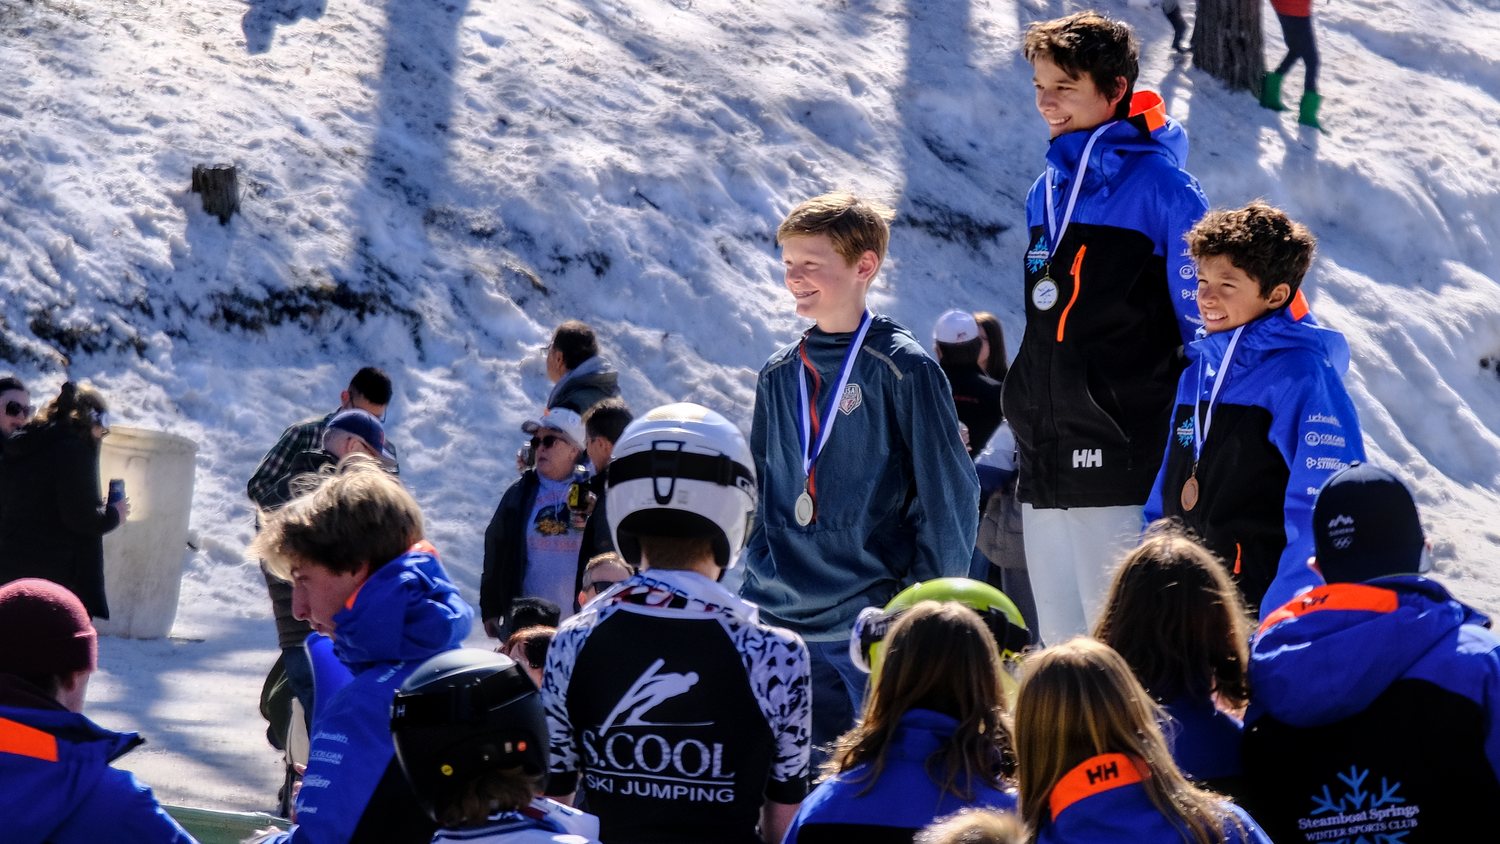 Award ceremony from Saturday's jumps at the 118th Annual Norge Ski Club Winter Tournament.